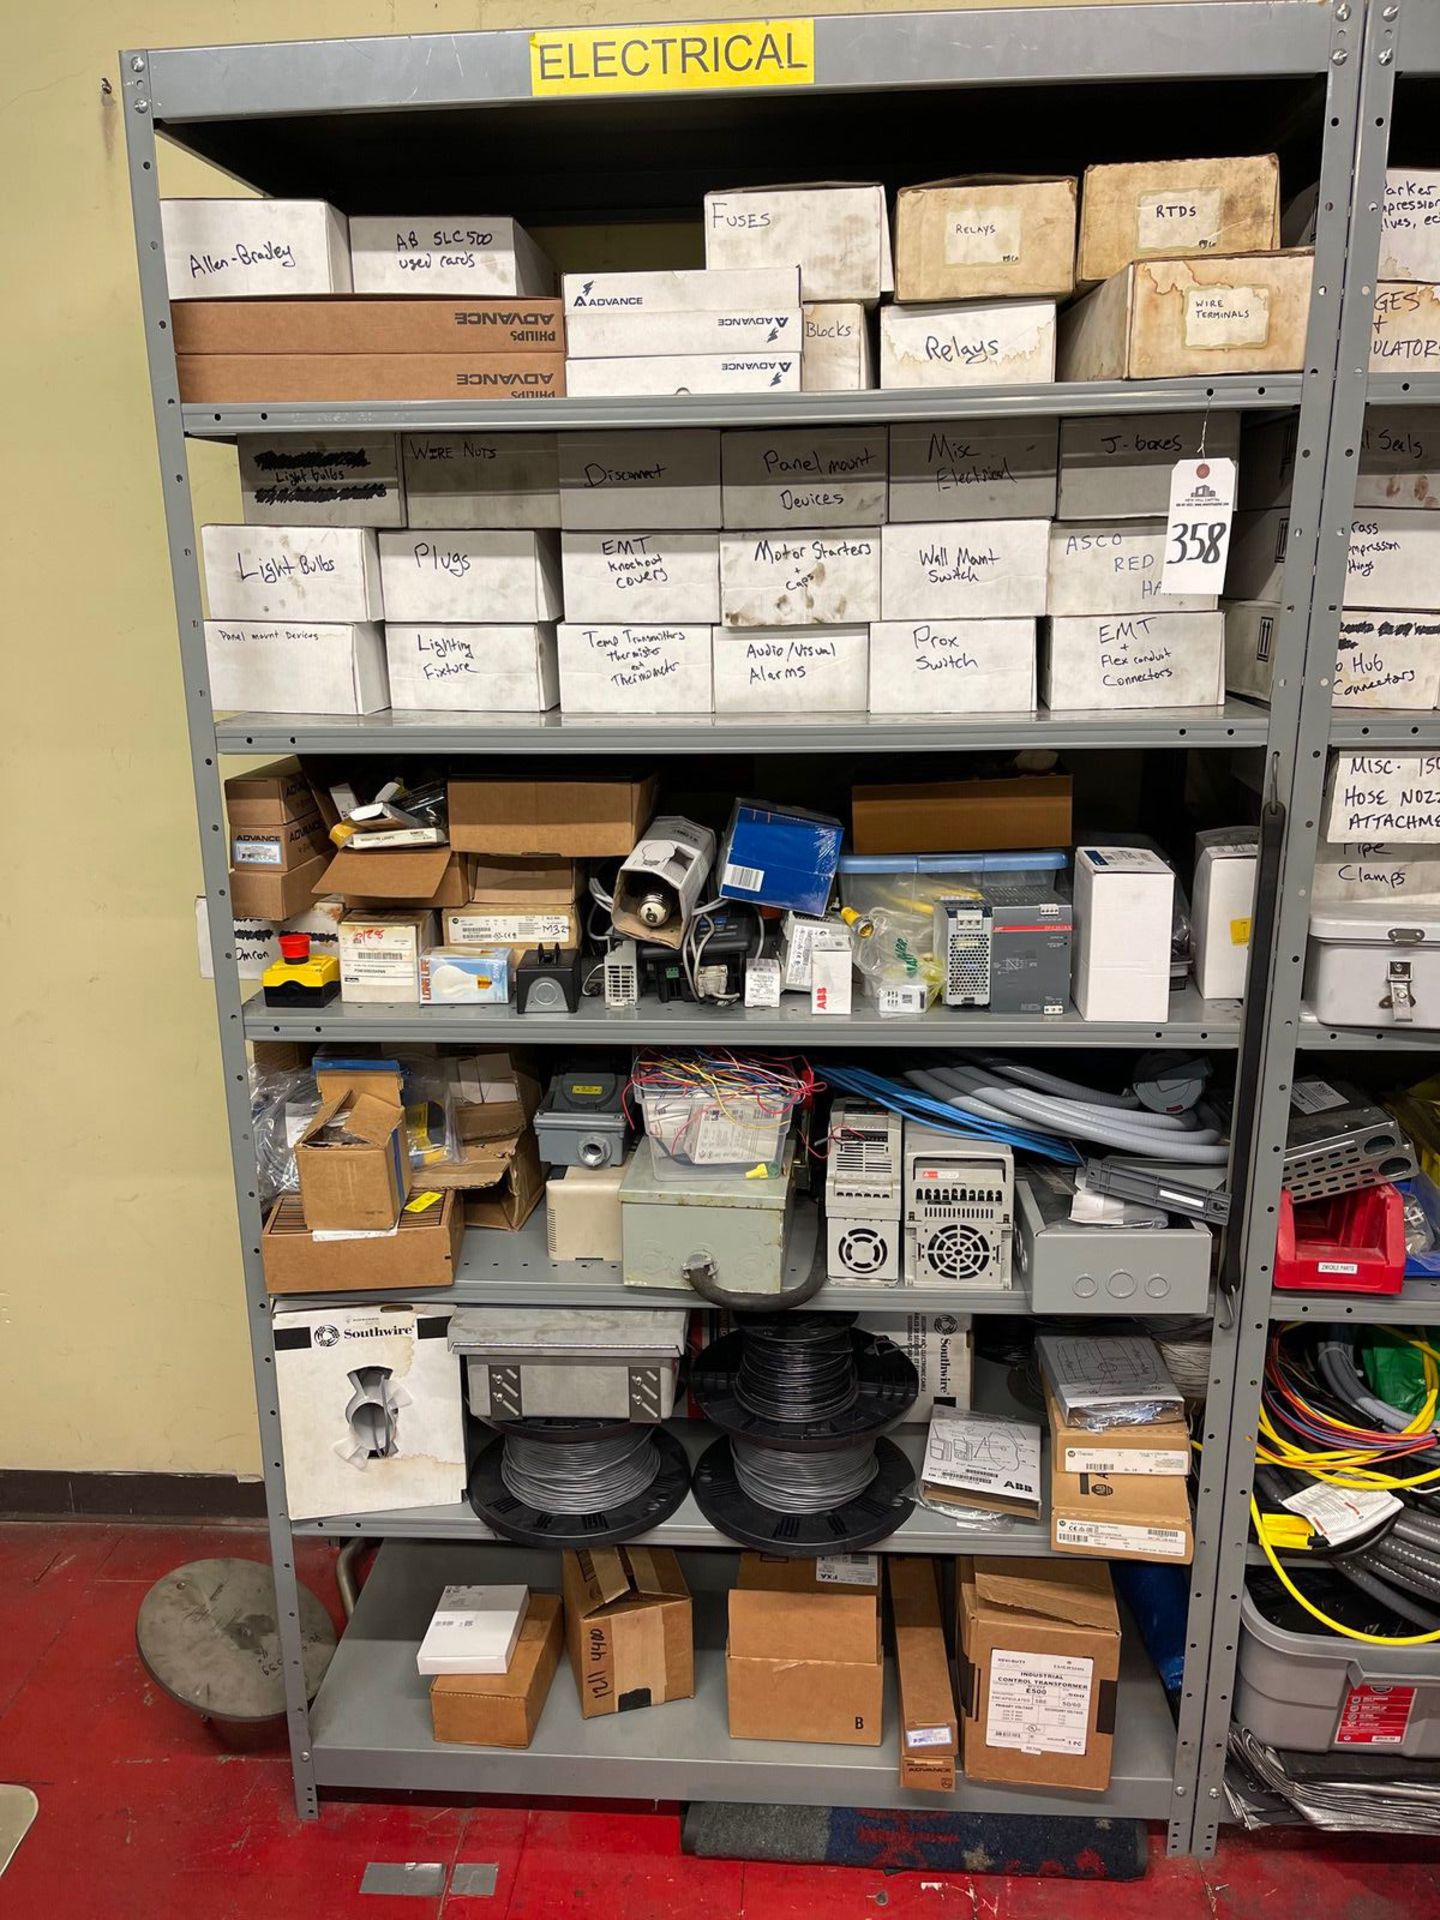 CONTENTS OF ENTIRE SHELVING UNIT LABELED ELECTRICAL | Rig Fee: 100